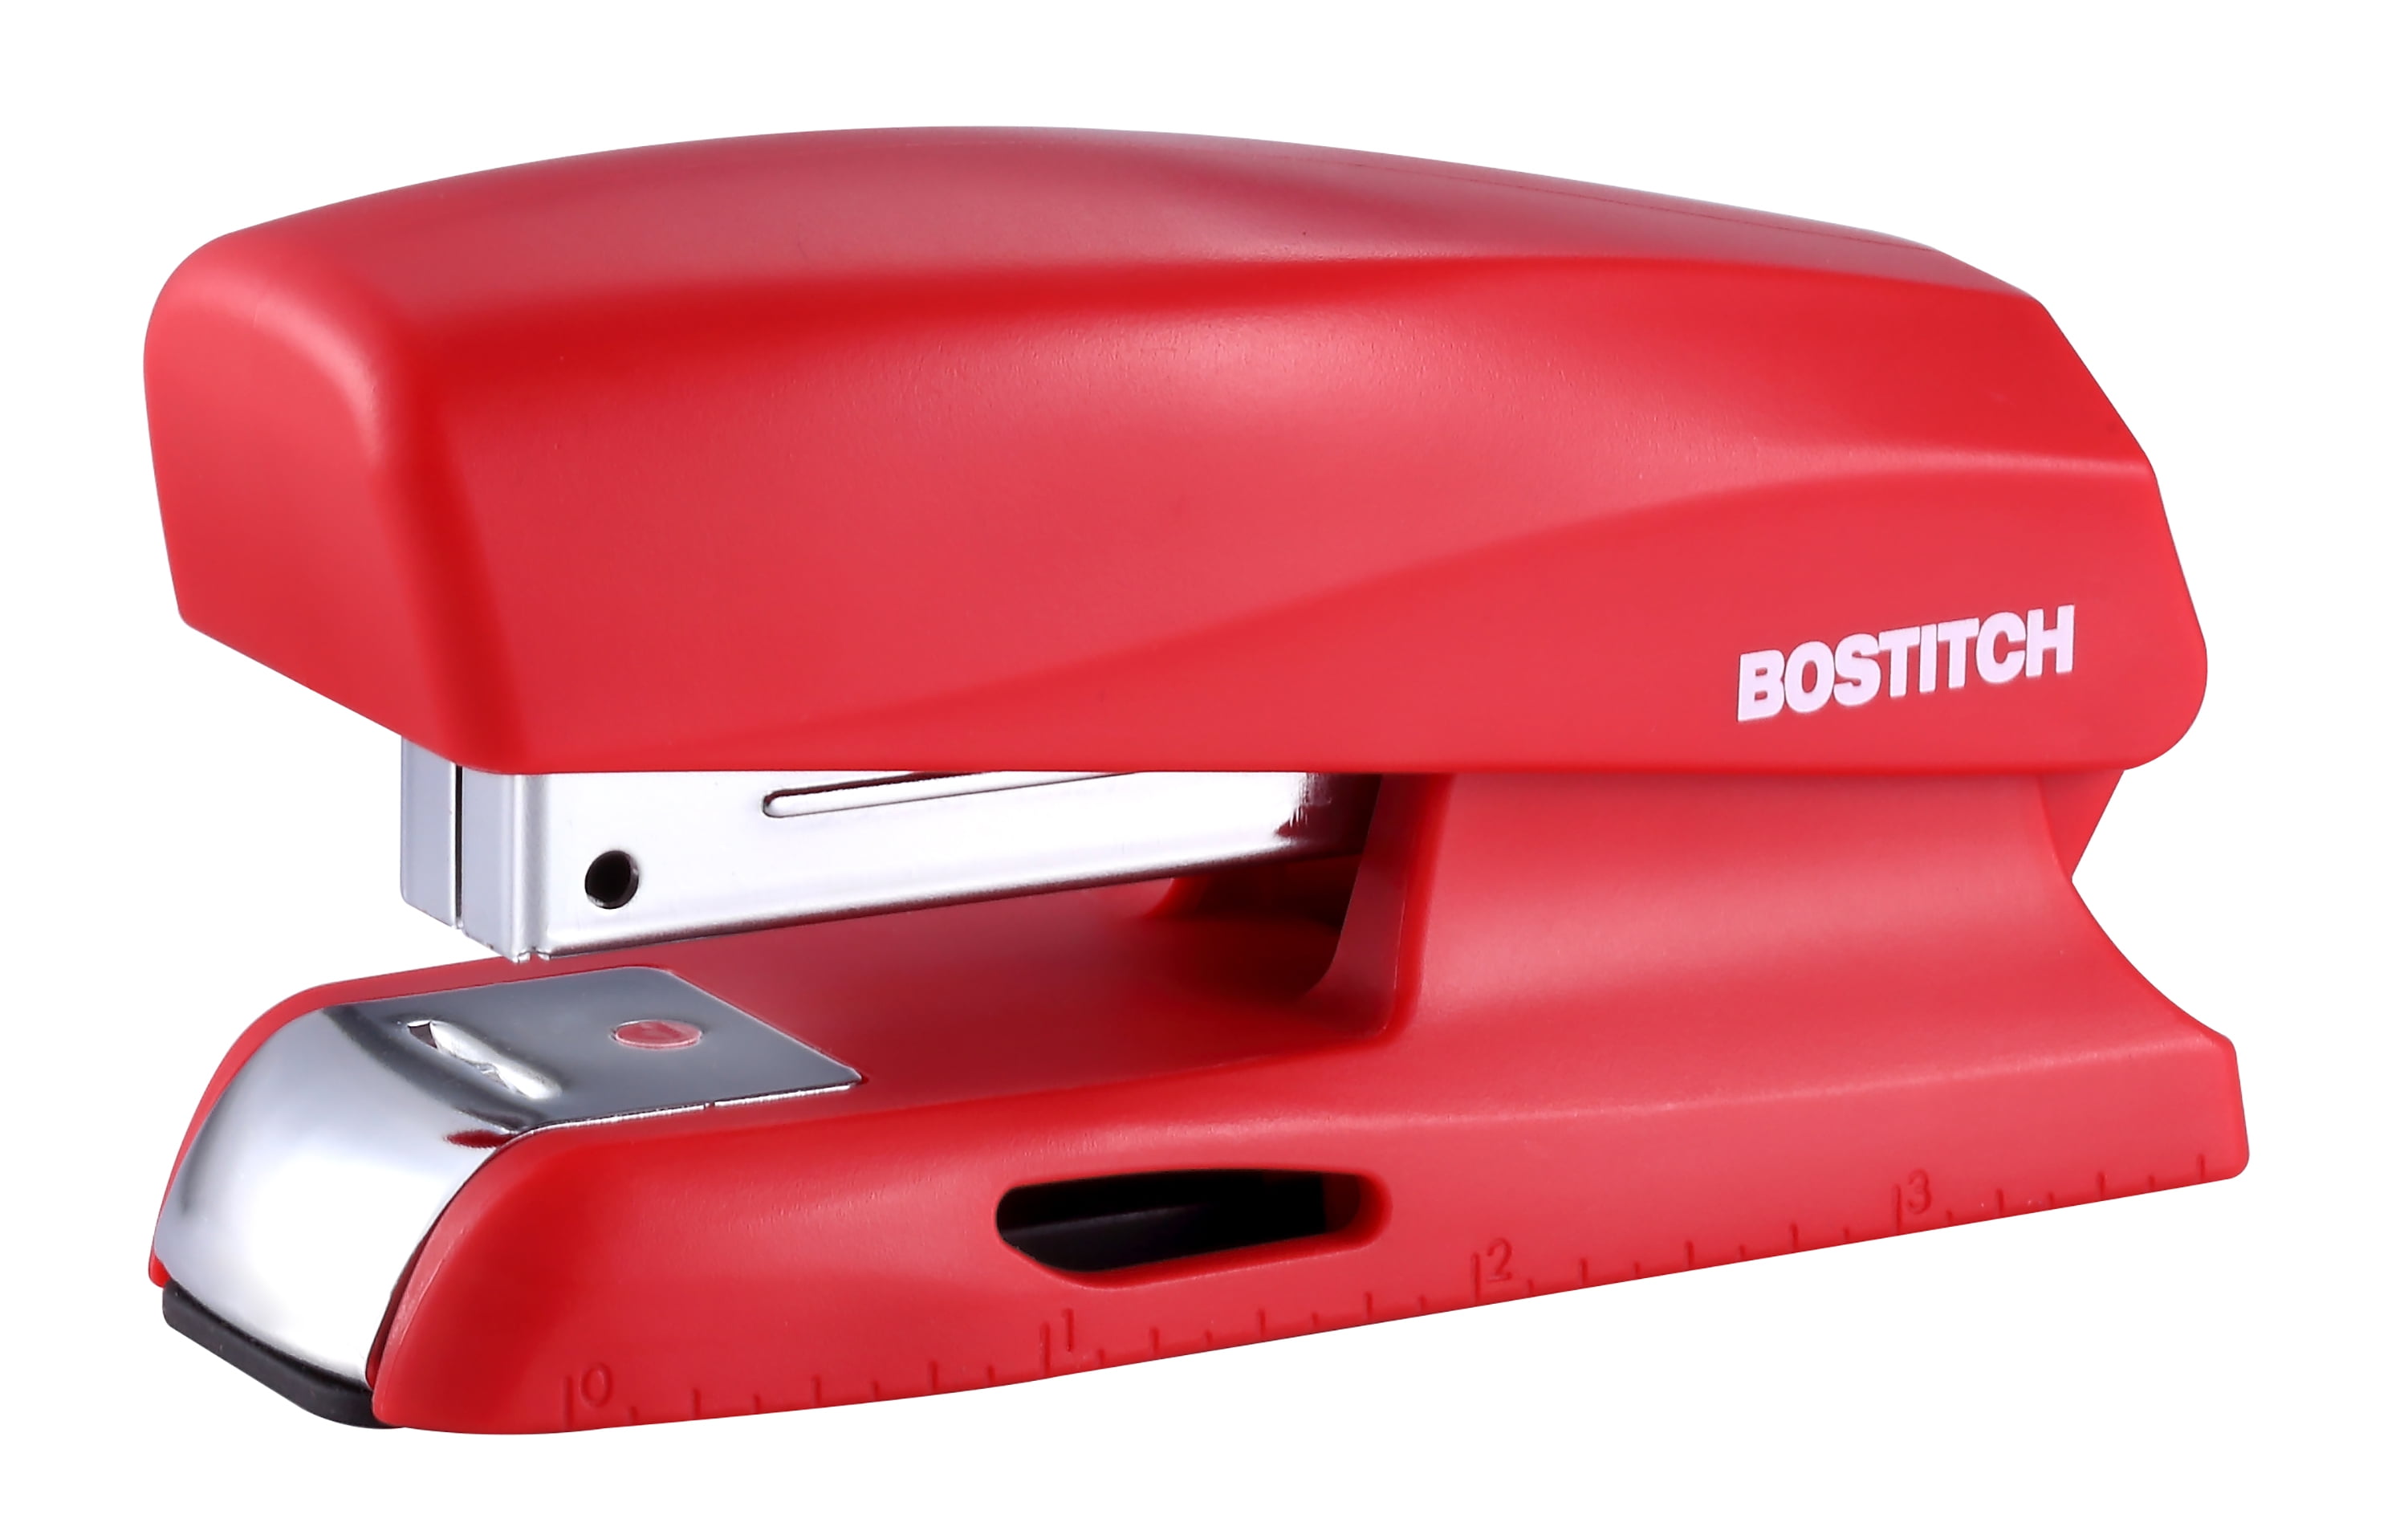 Bostitch Office 20 Sheet Stapler One per Order B150-Asst No Color Choice Fits into The Palm of Your Hand; Assorted Small Stapler Size